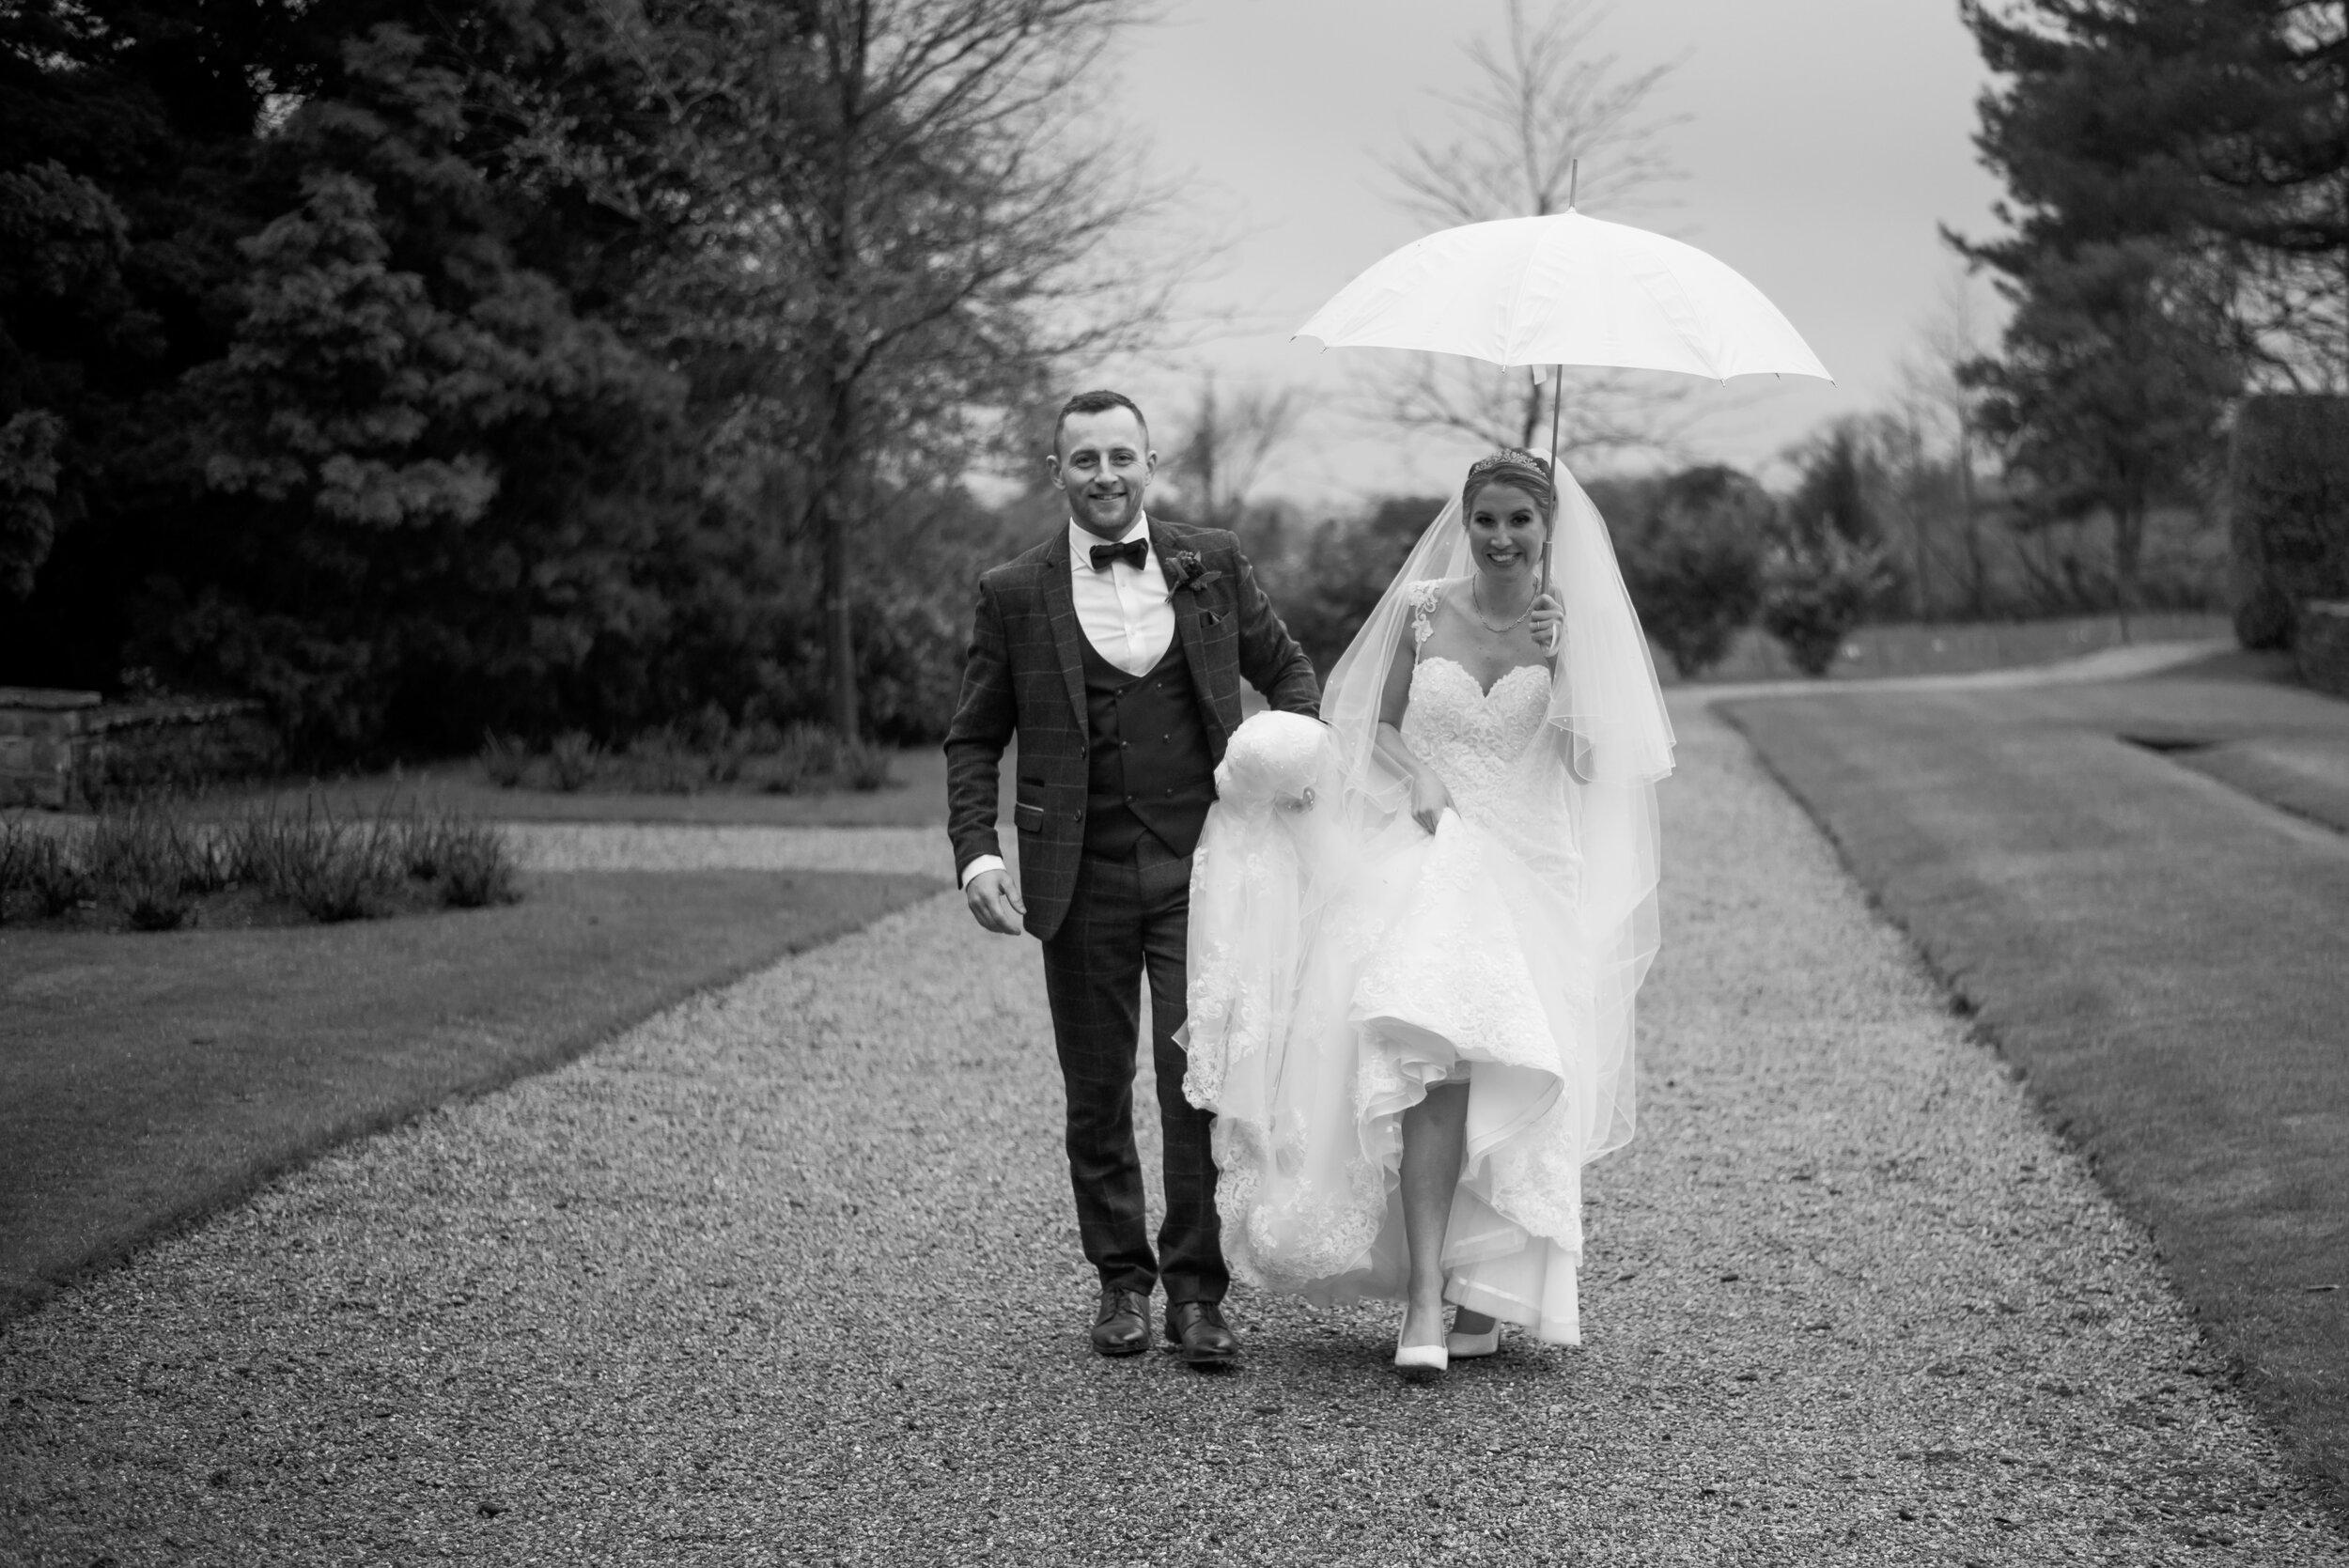 The rain won't stop this bride and groom